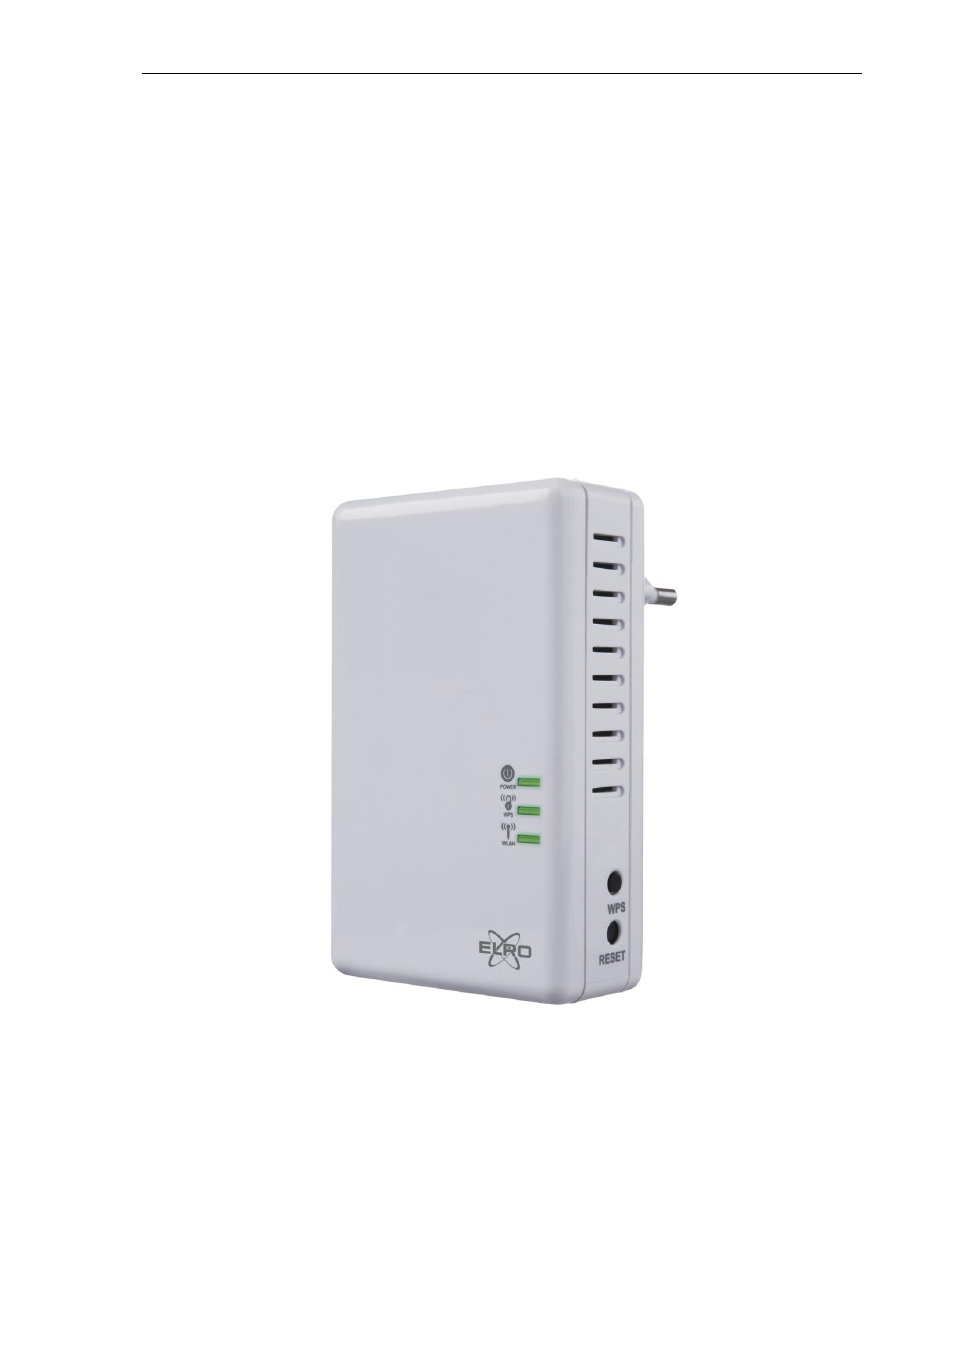 ELRO CR1 WLAN Repeater USERS MANUAL Manuel d'utilisation | Pages: 86